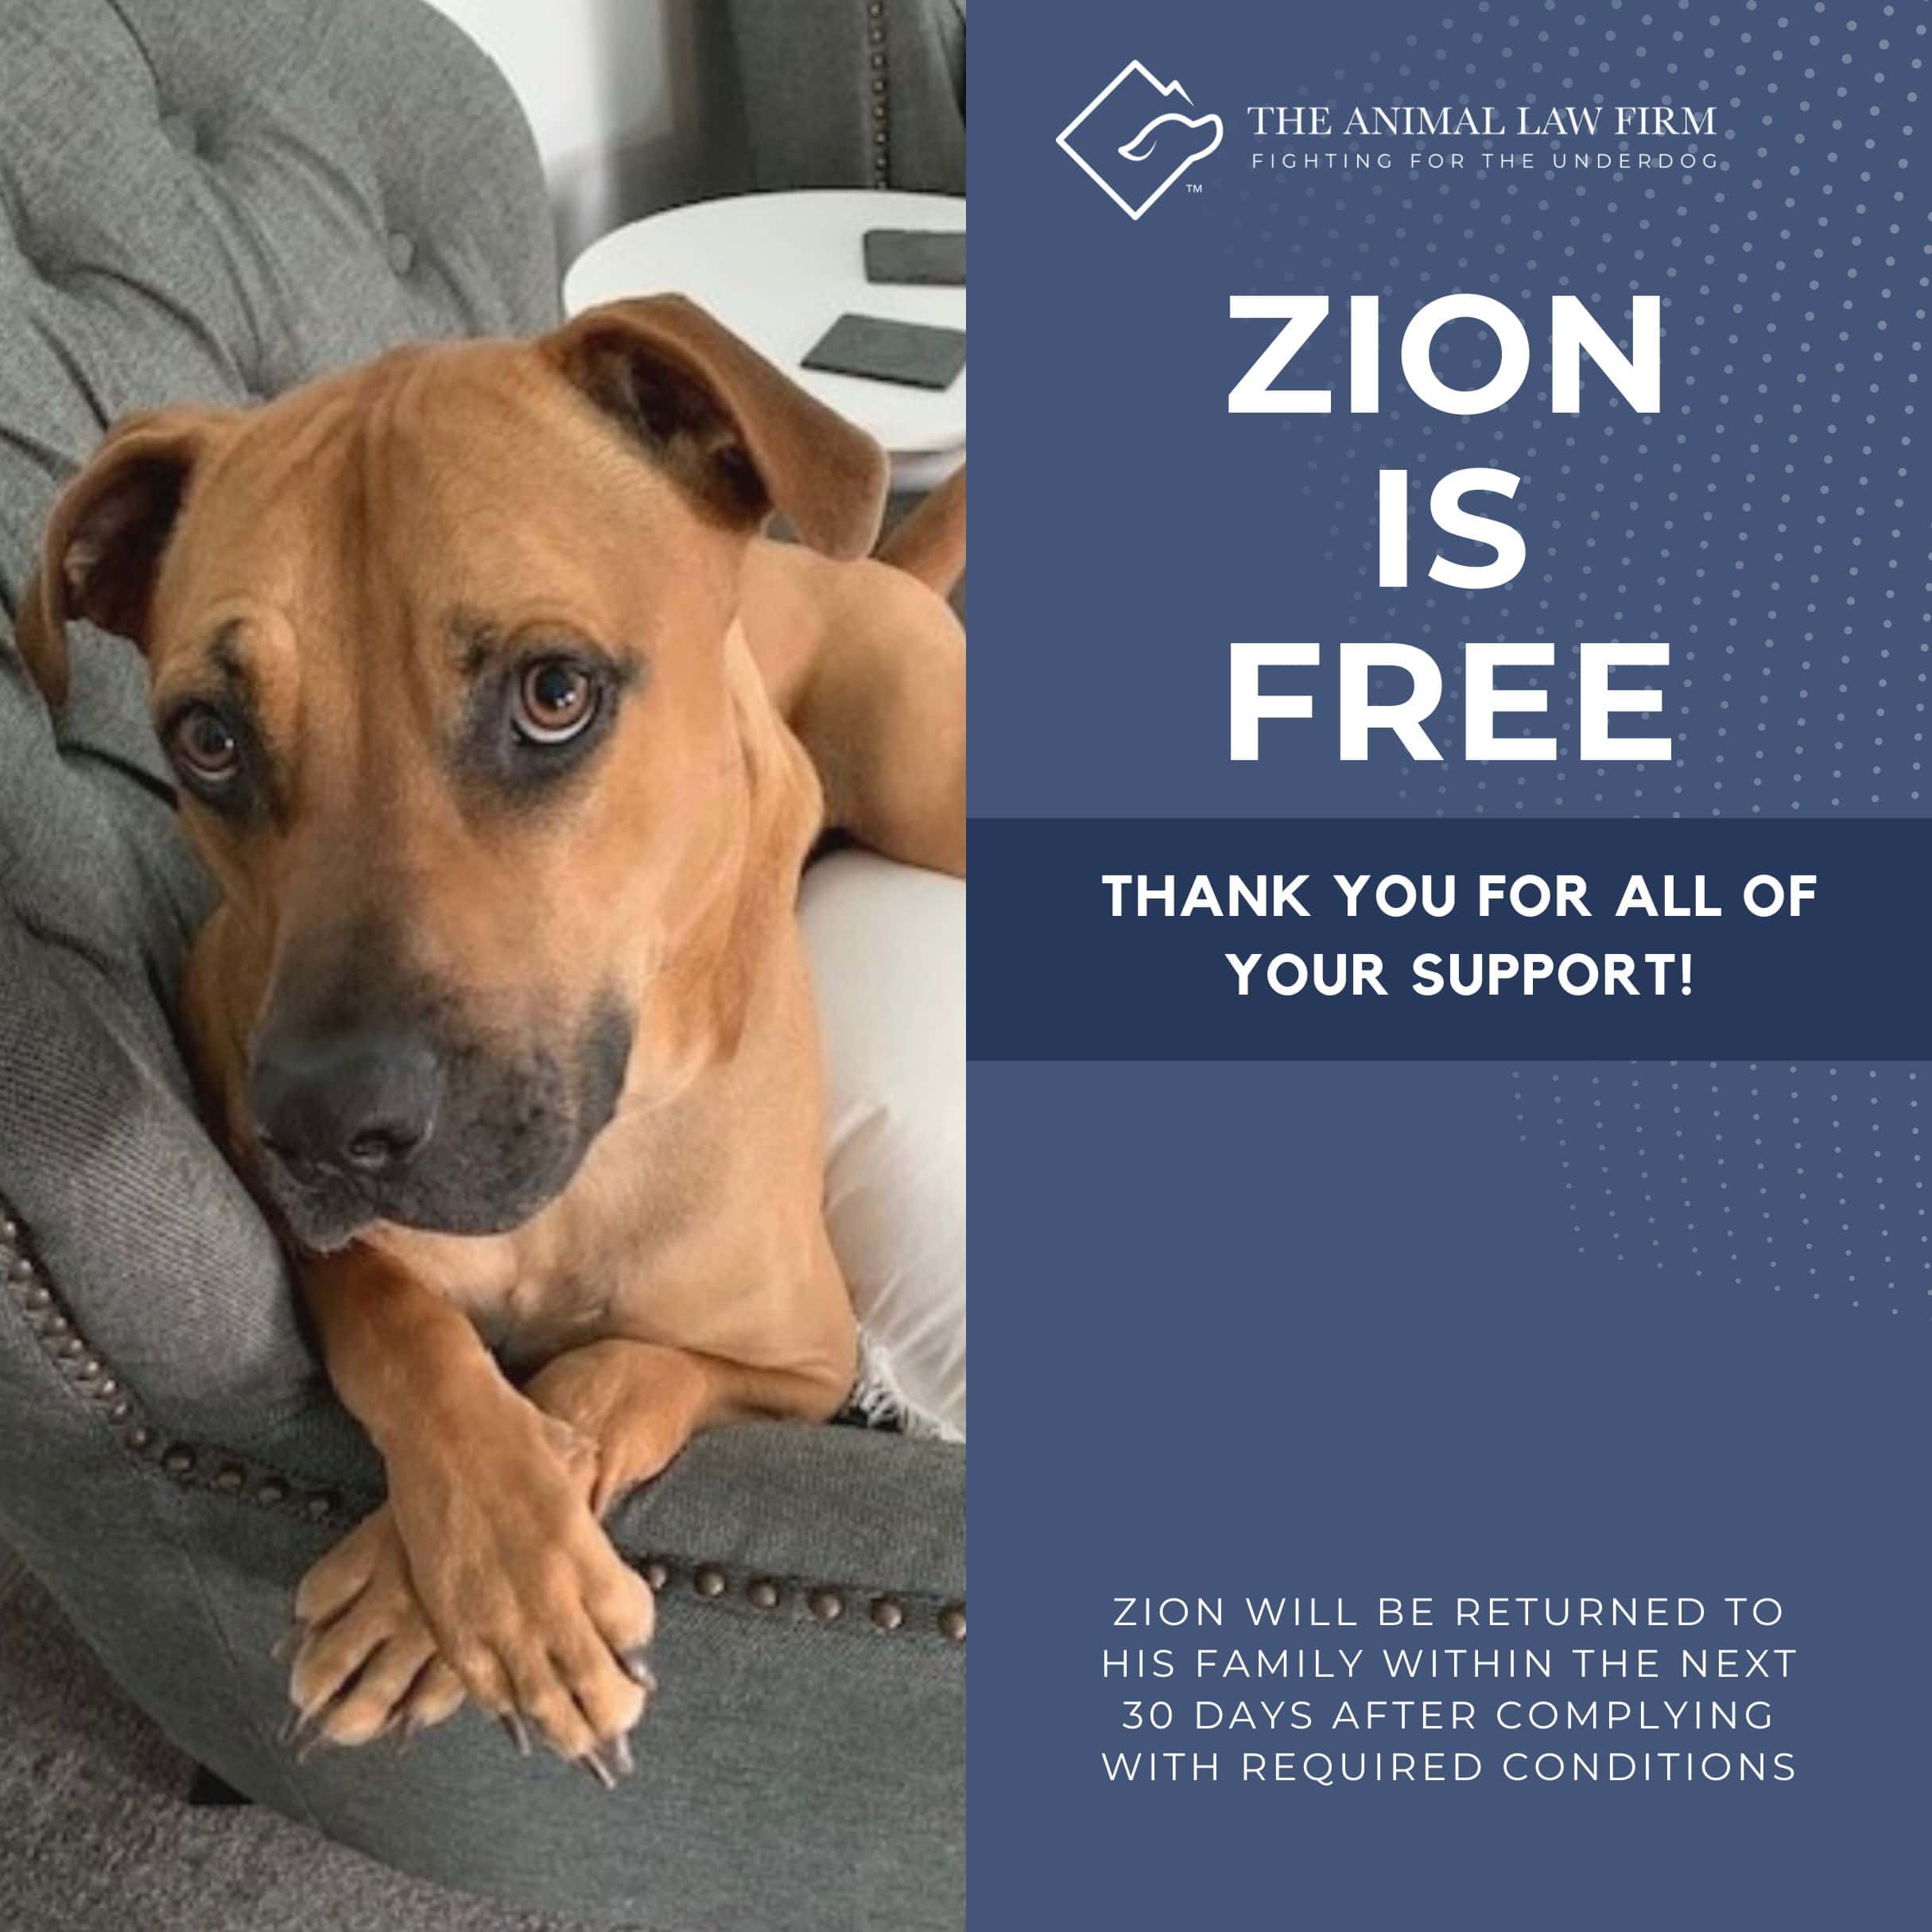 ZION IS FREE